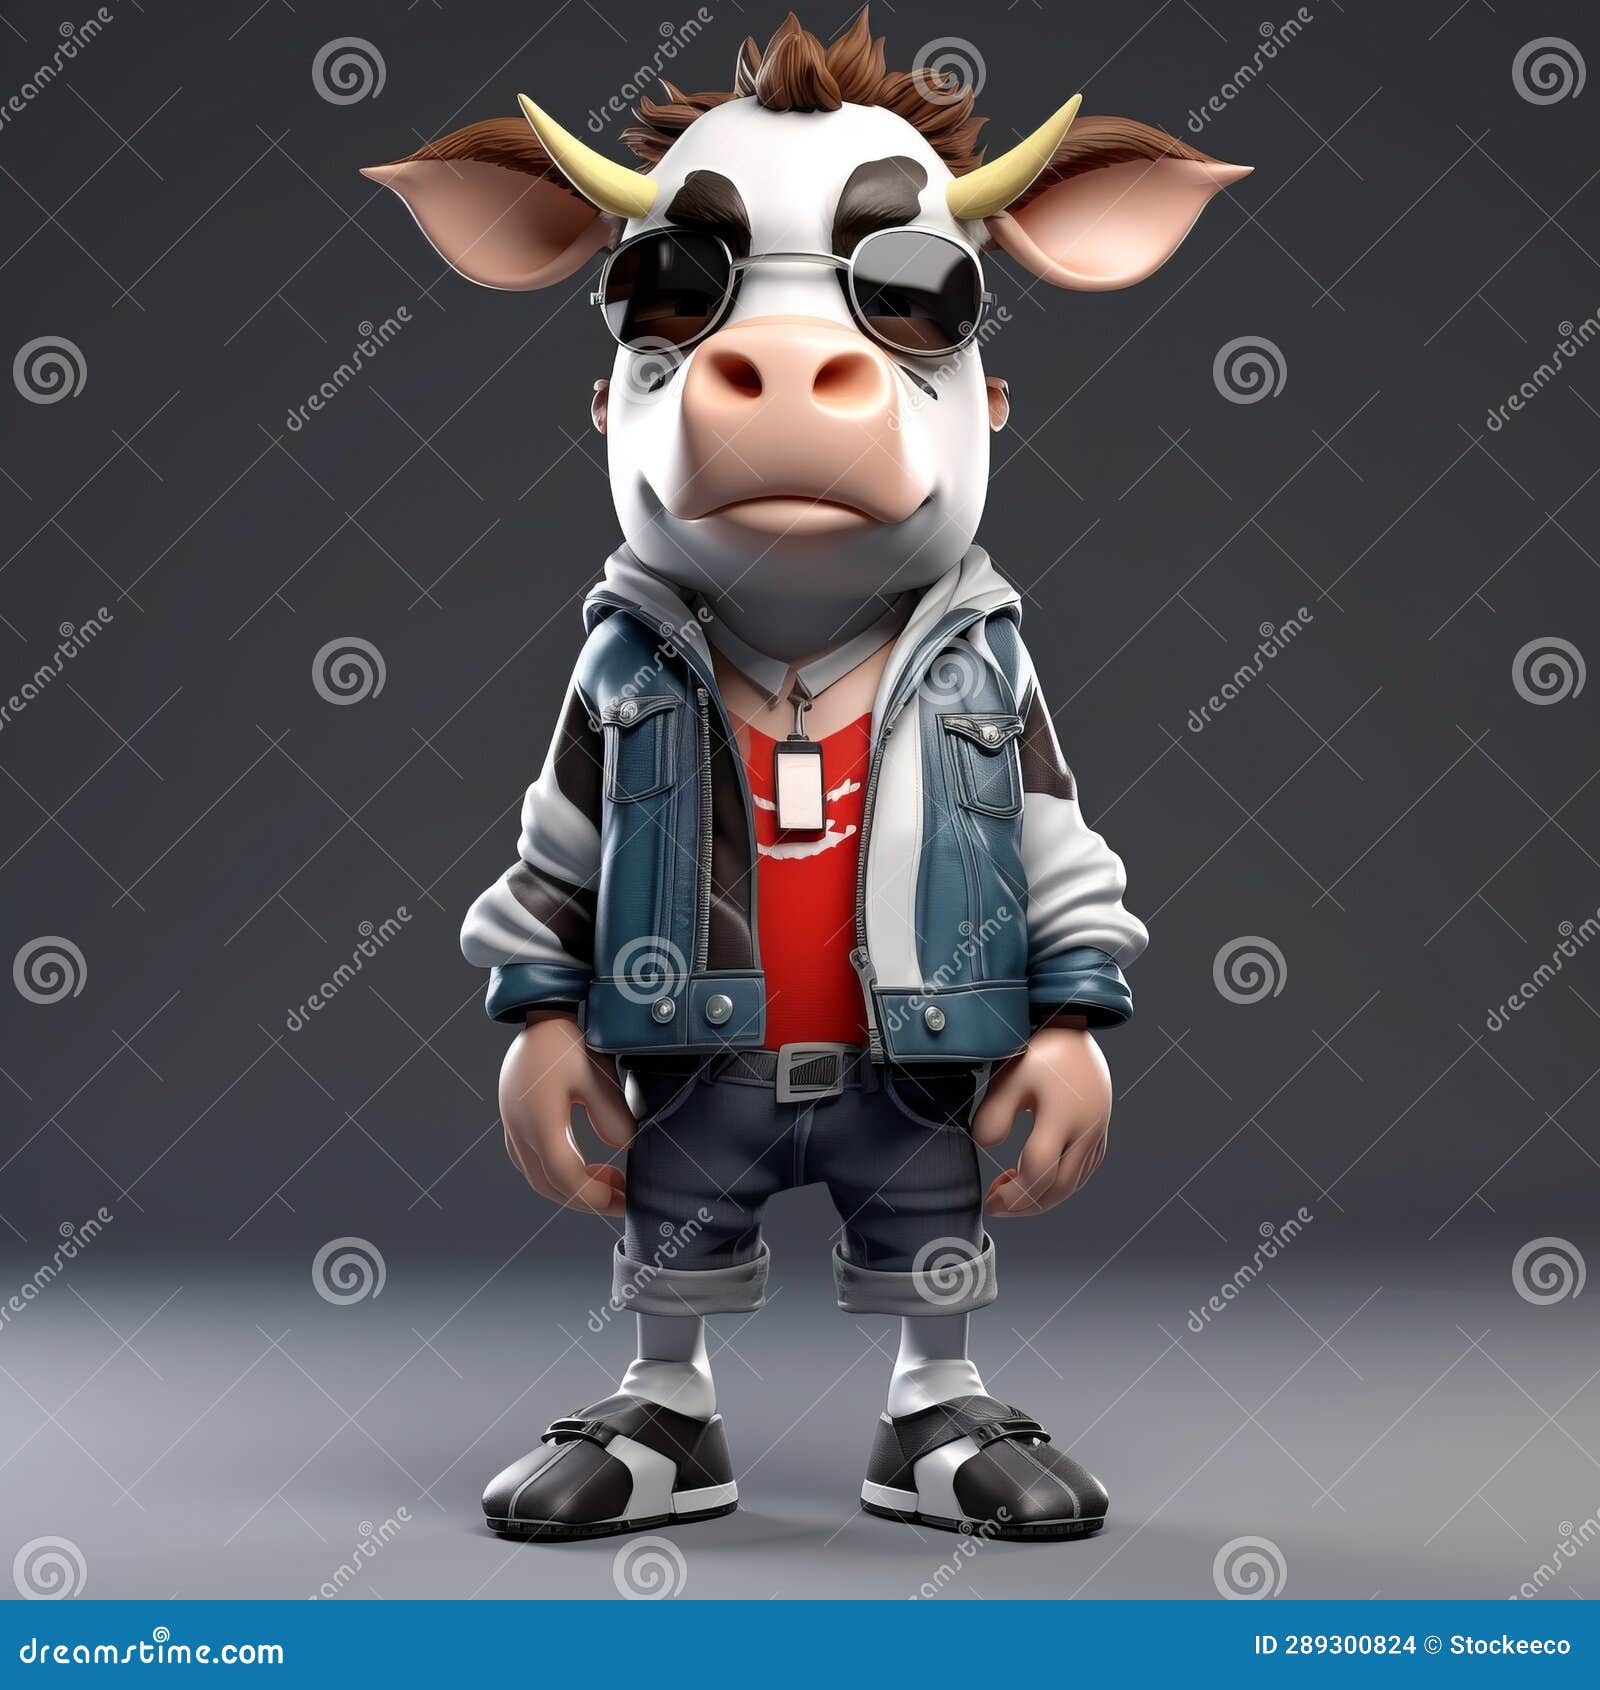 Anime Cow Images, HD Pictures For Free Vectors Download - Lovepik.com